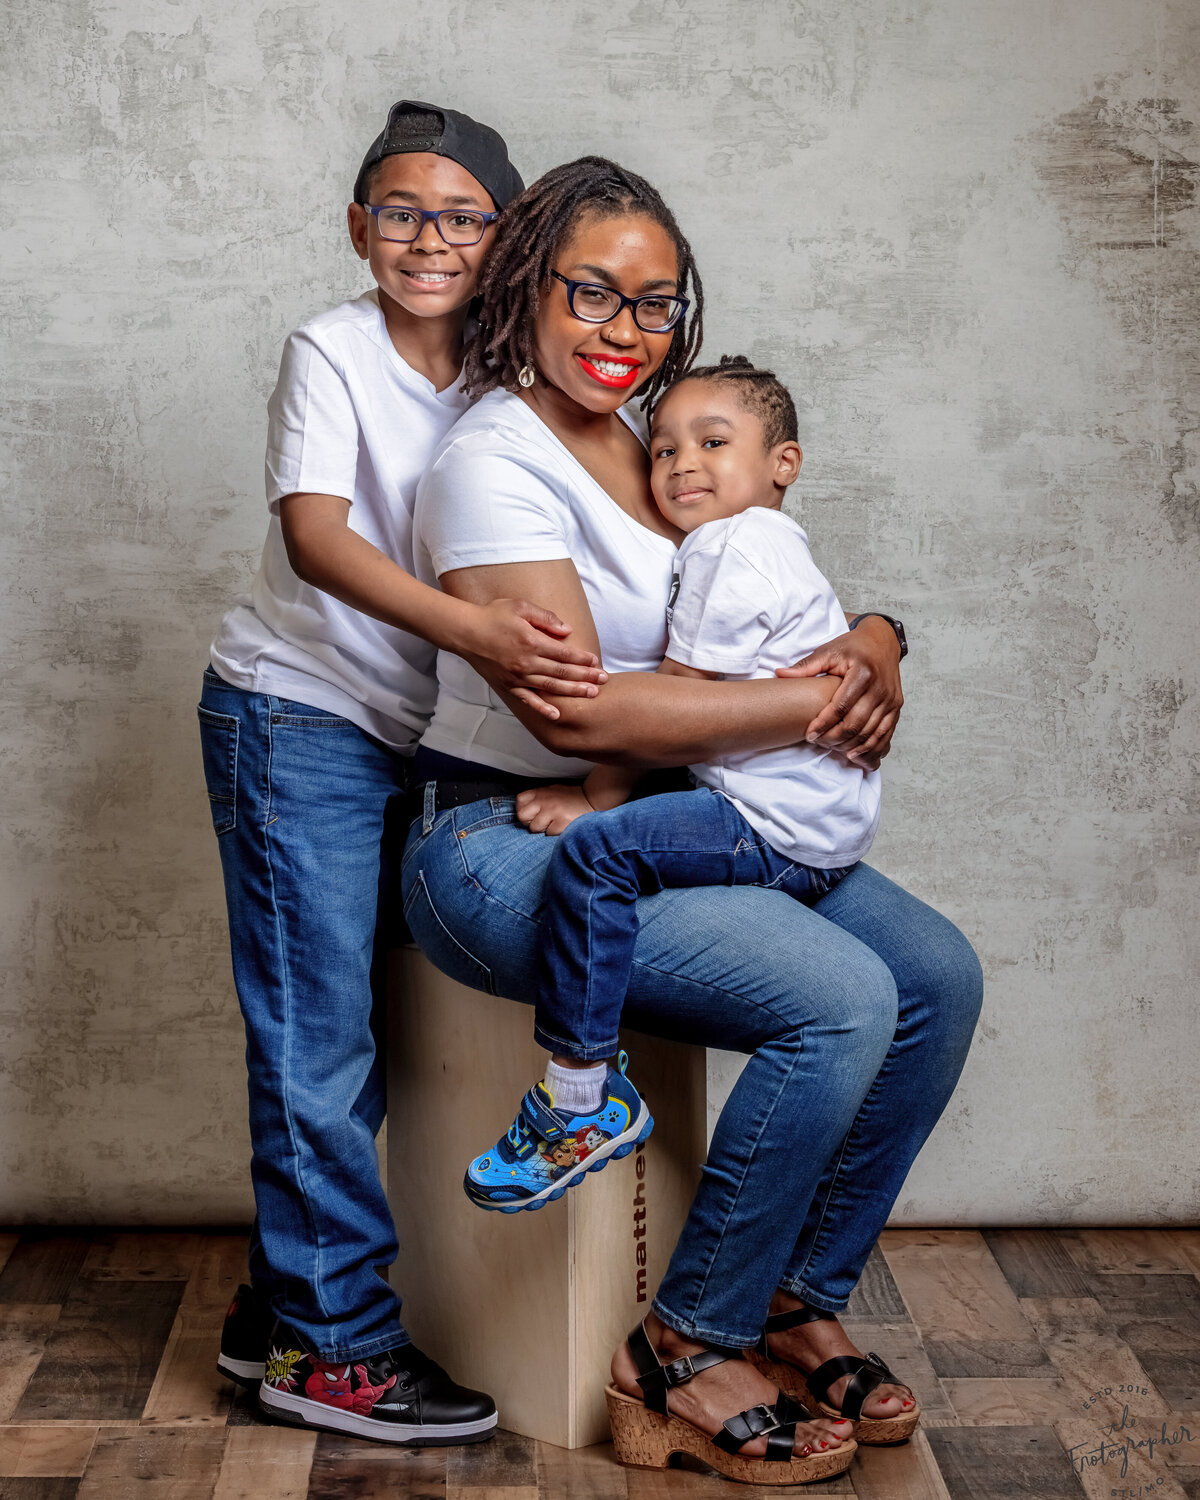 St Louis Photographer-the Frotographer-5301